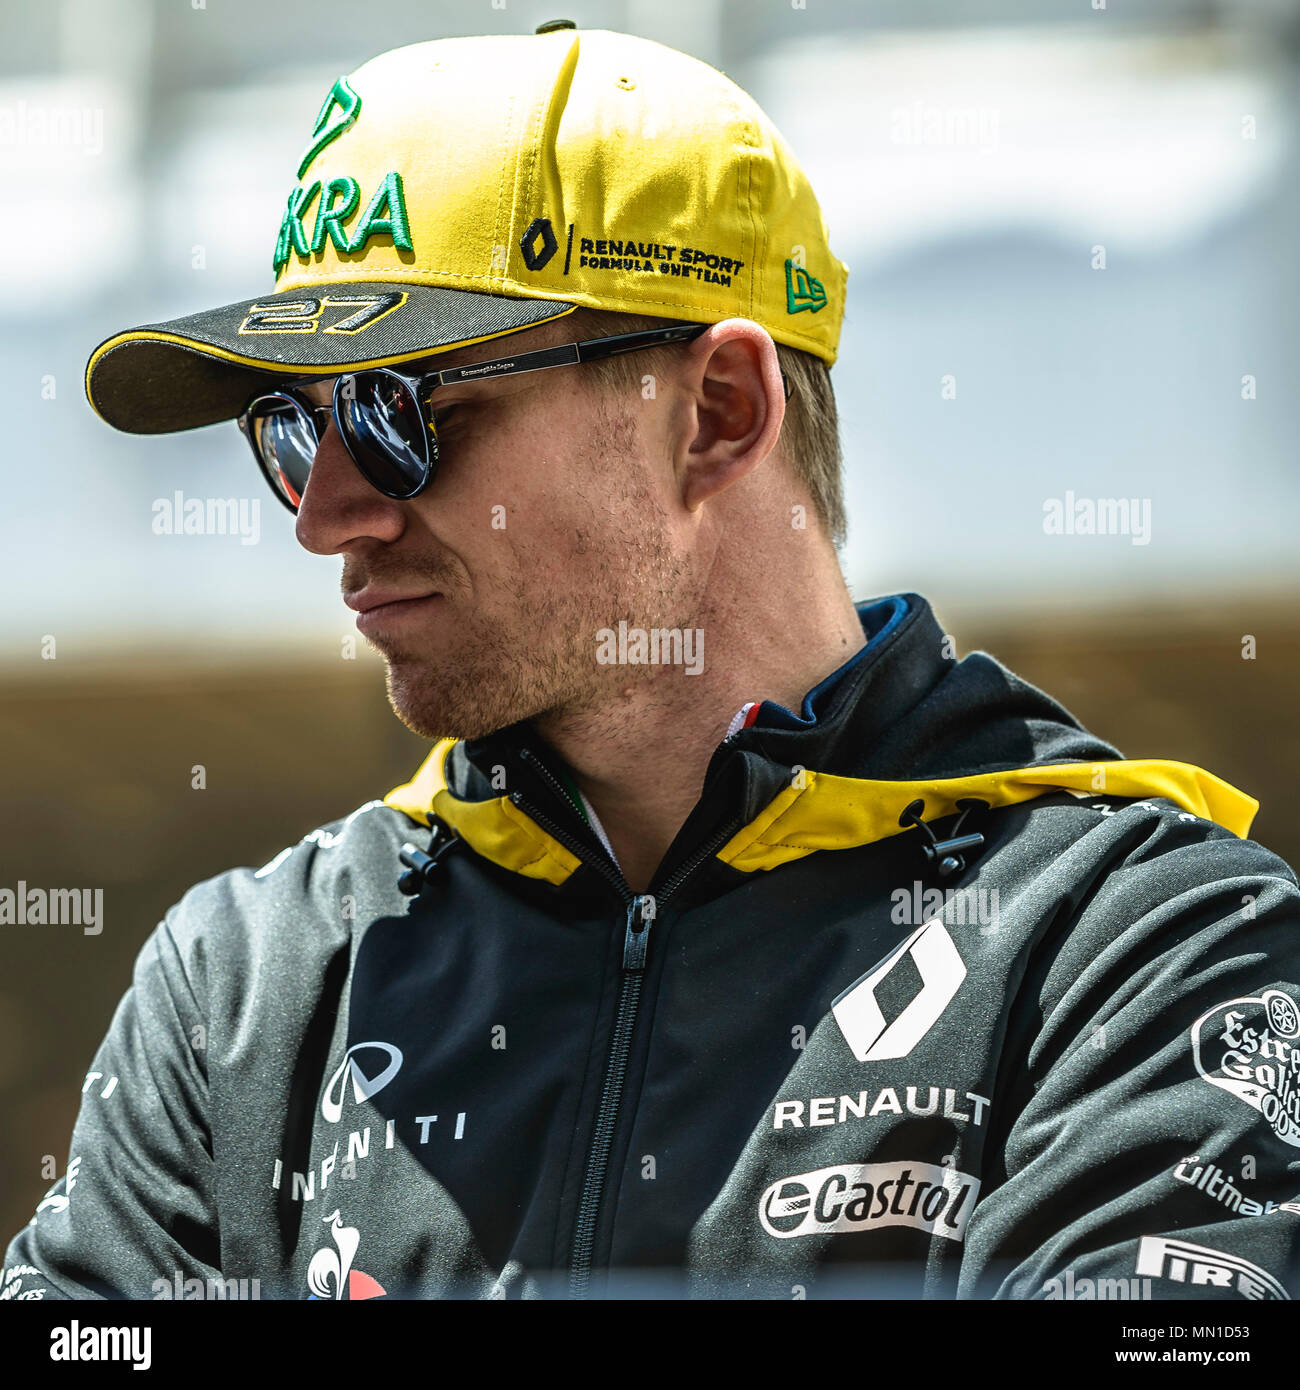 Barcelona, Spain. 13 May, 2018:  NICO HULKENBERG (GER), Renault, is presented to the crowd prior the Spanish GP at Circuit de Barcelona - Catalunya Credit: Matthias Oesterle/Alamy Live News Stock Photo